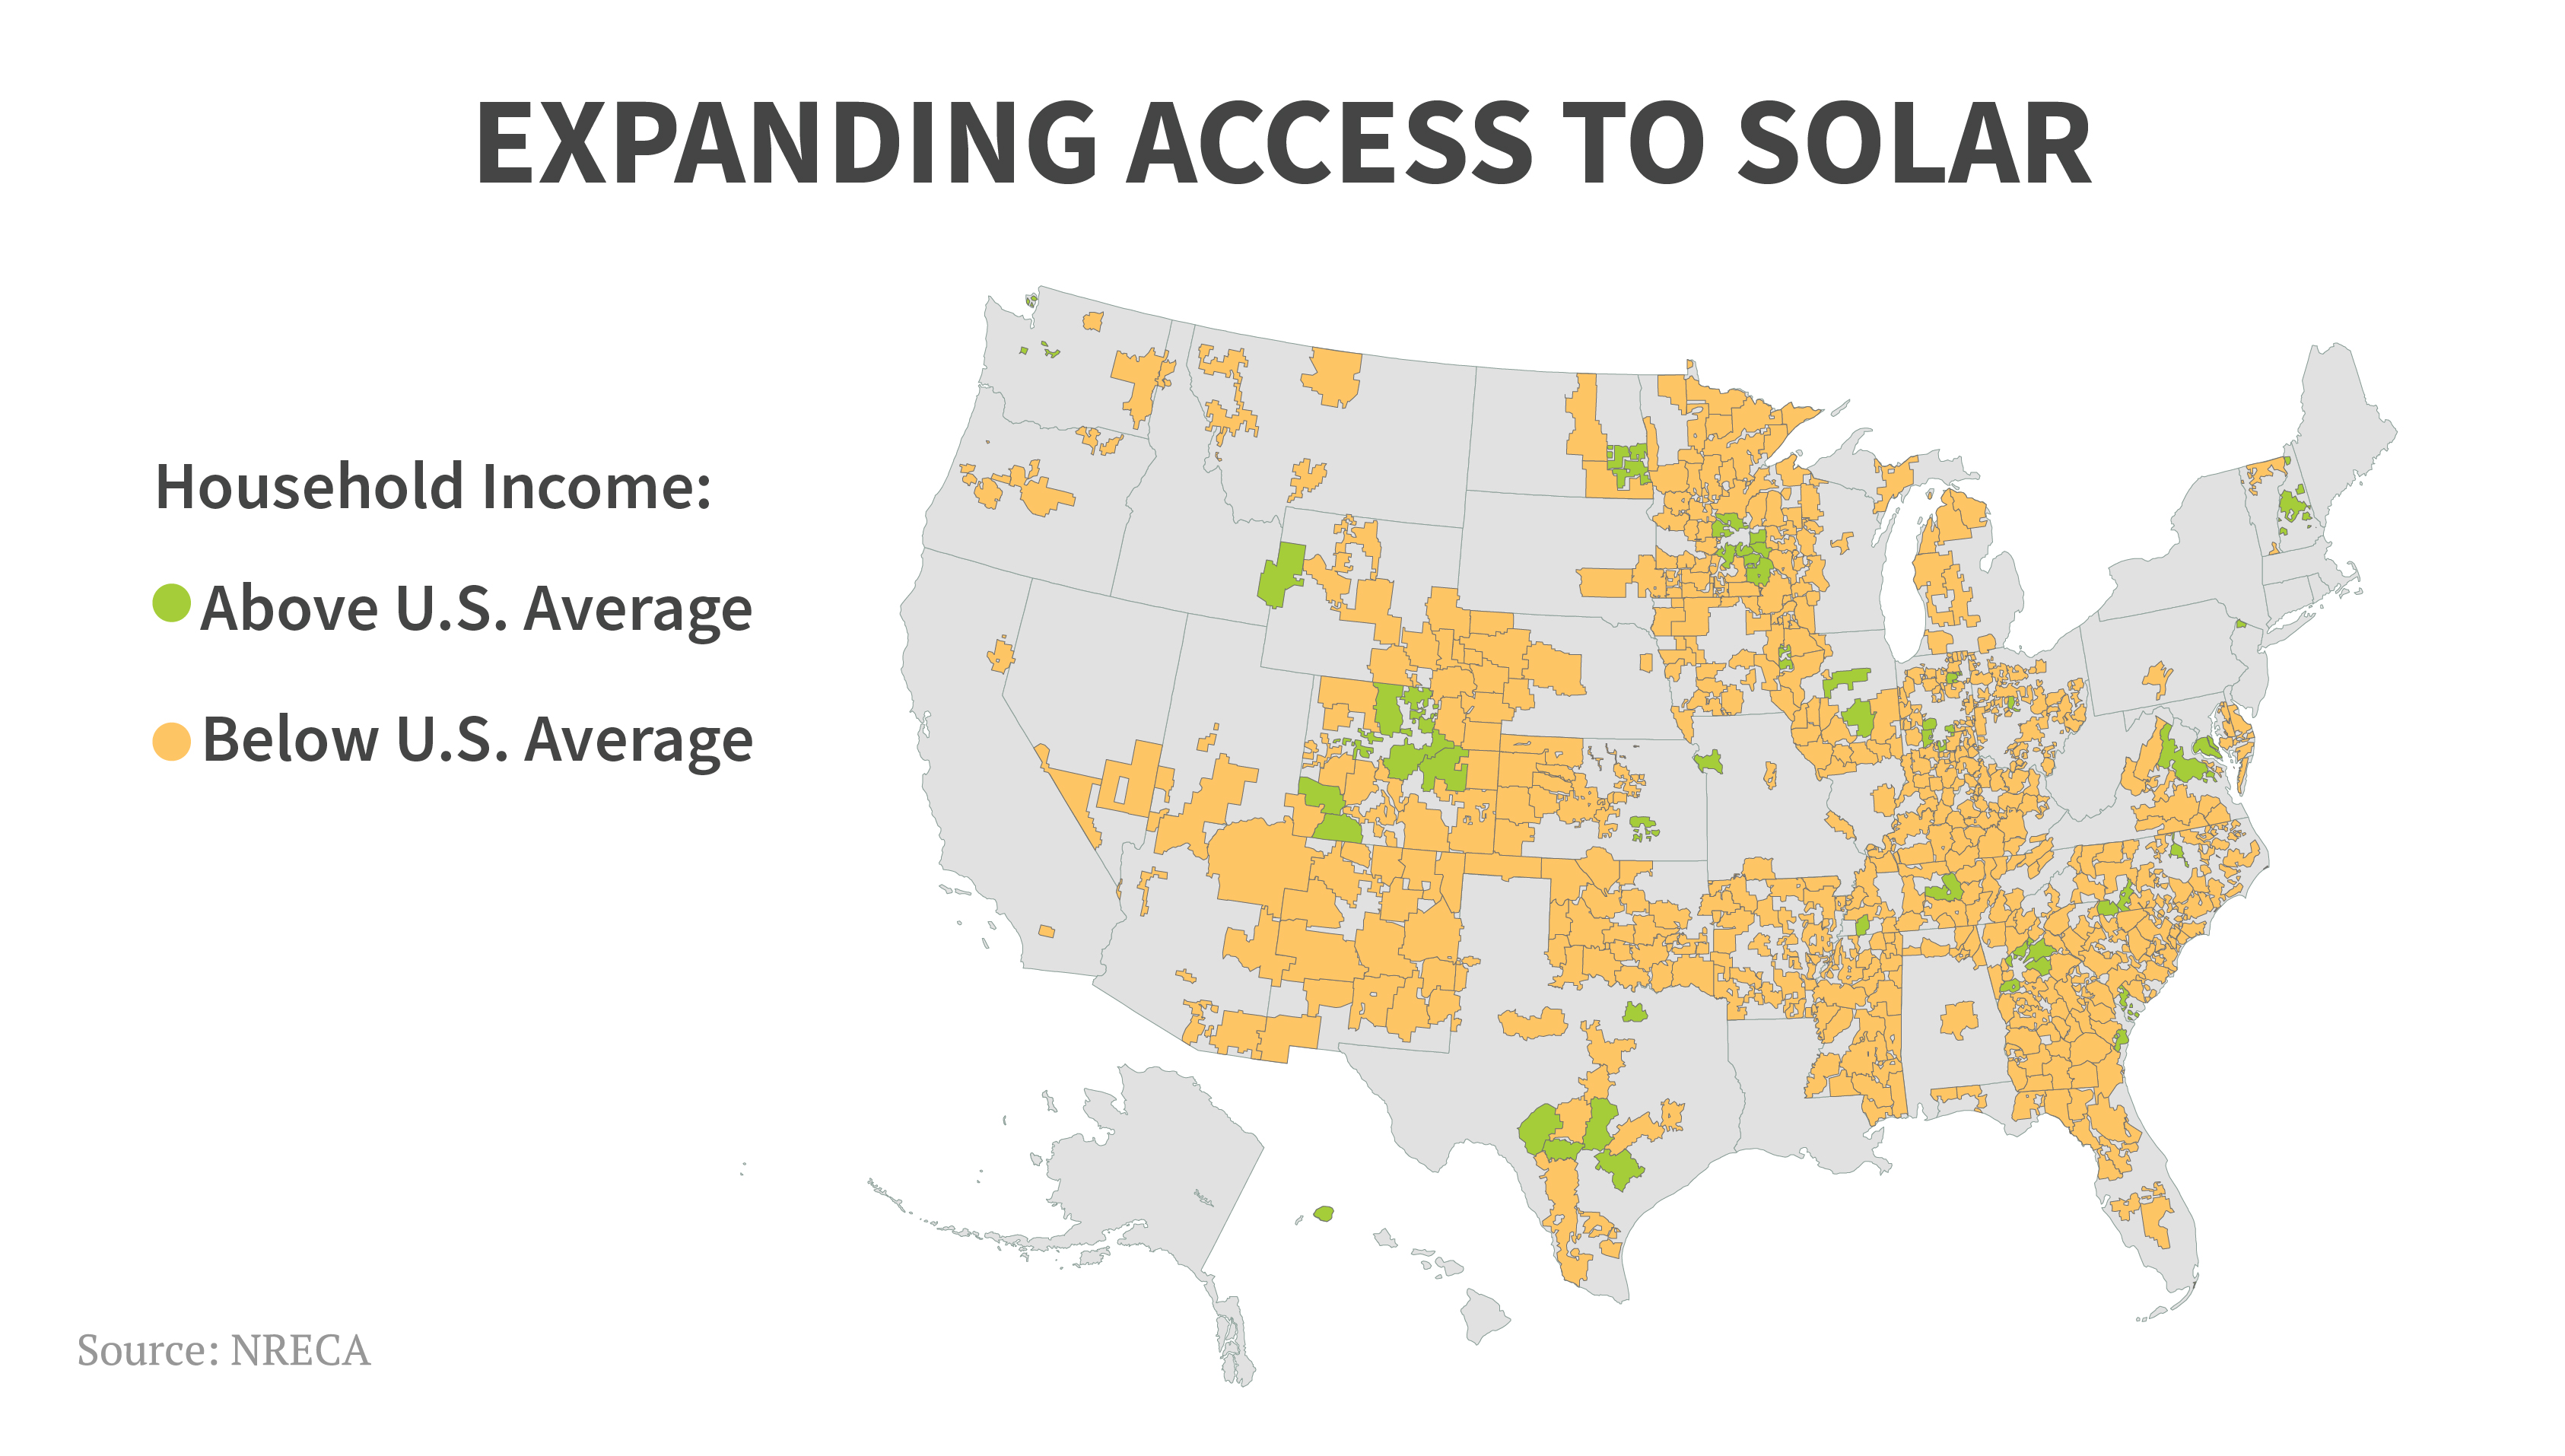 Co-ops are bringing solar to communities where the household income is below the national average.